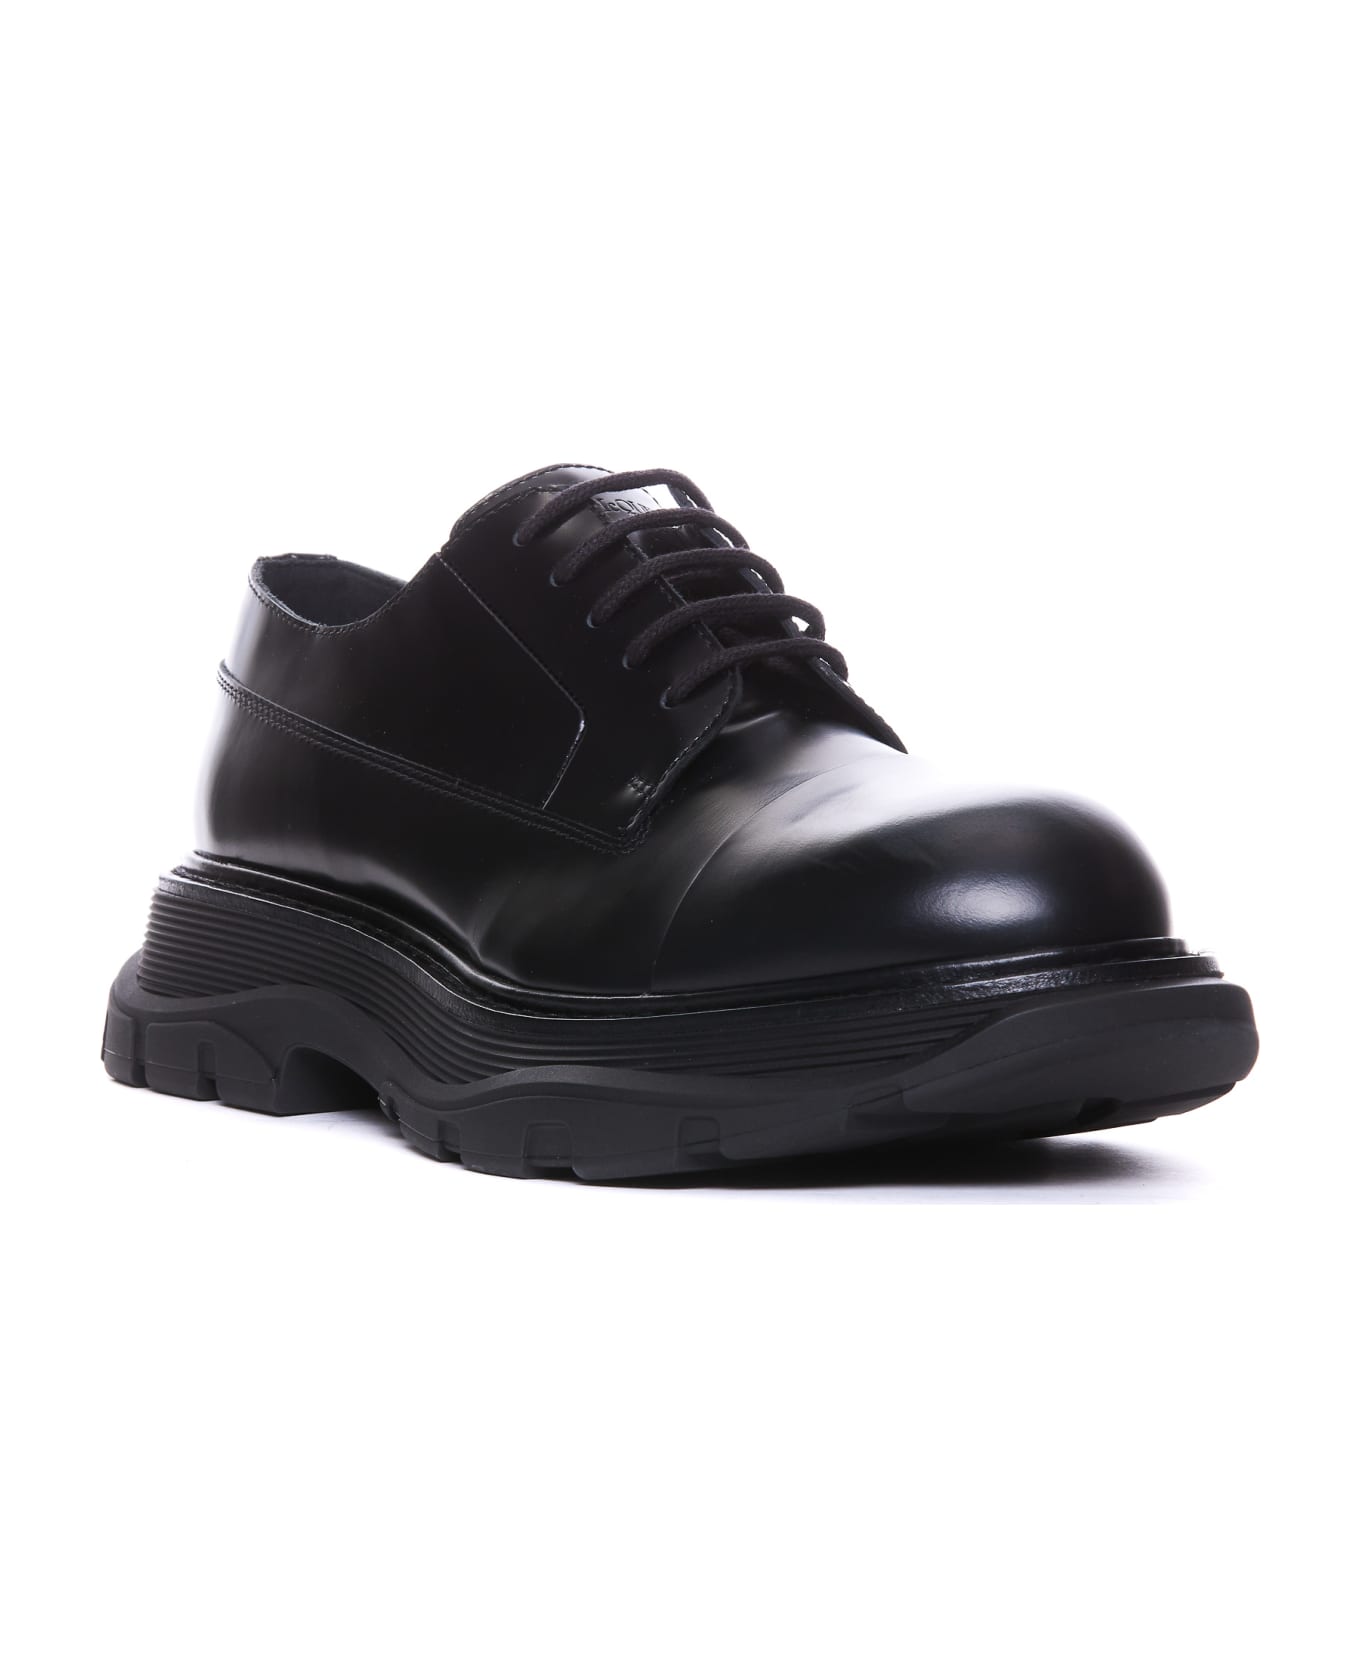 Alexander McQueen Tread Laced Up Shoes - Black